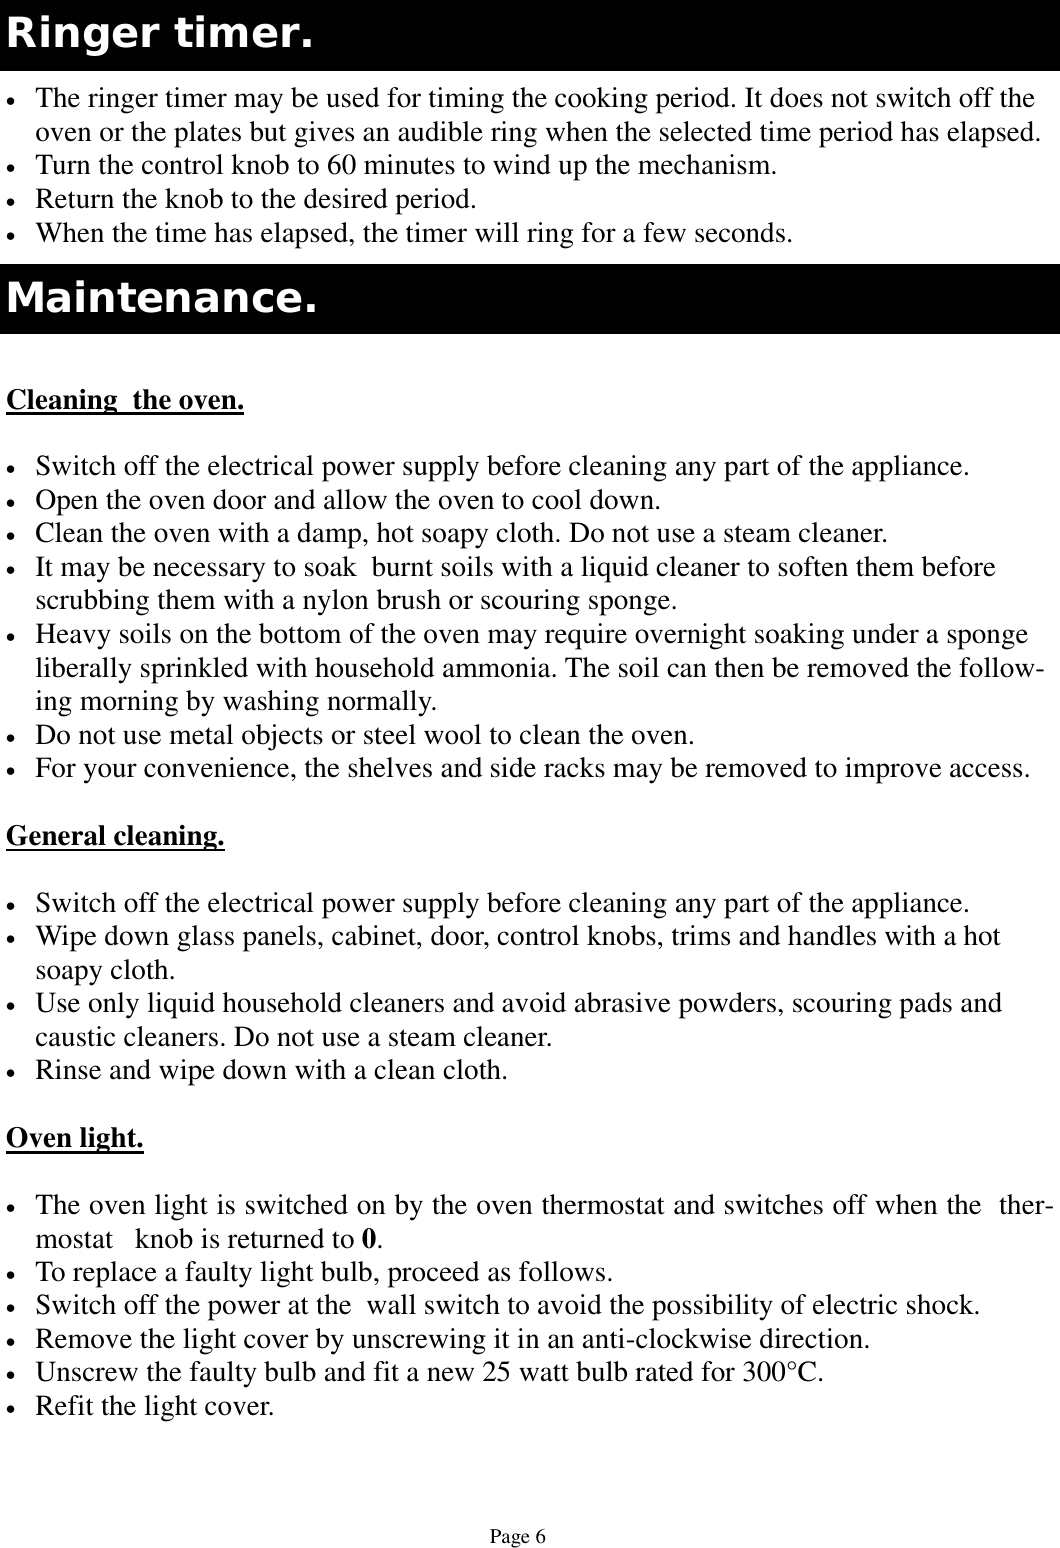 Page 6 of 12 - Defy Defy-Kitchenmaster--In-Sb-Users-Manual- 065 553  In Kitchemaster 2006 2YW Defy-kitchenmaster--in-sb-users-manual